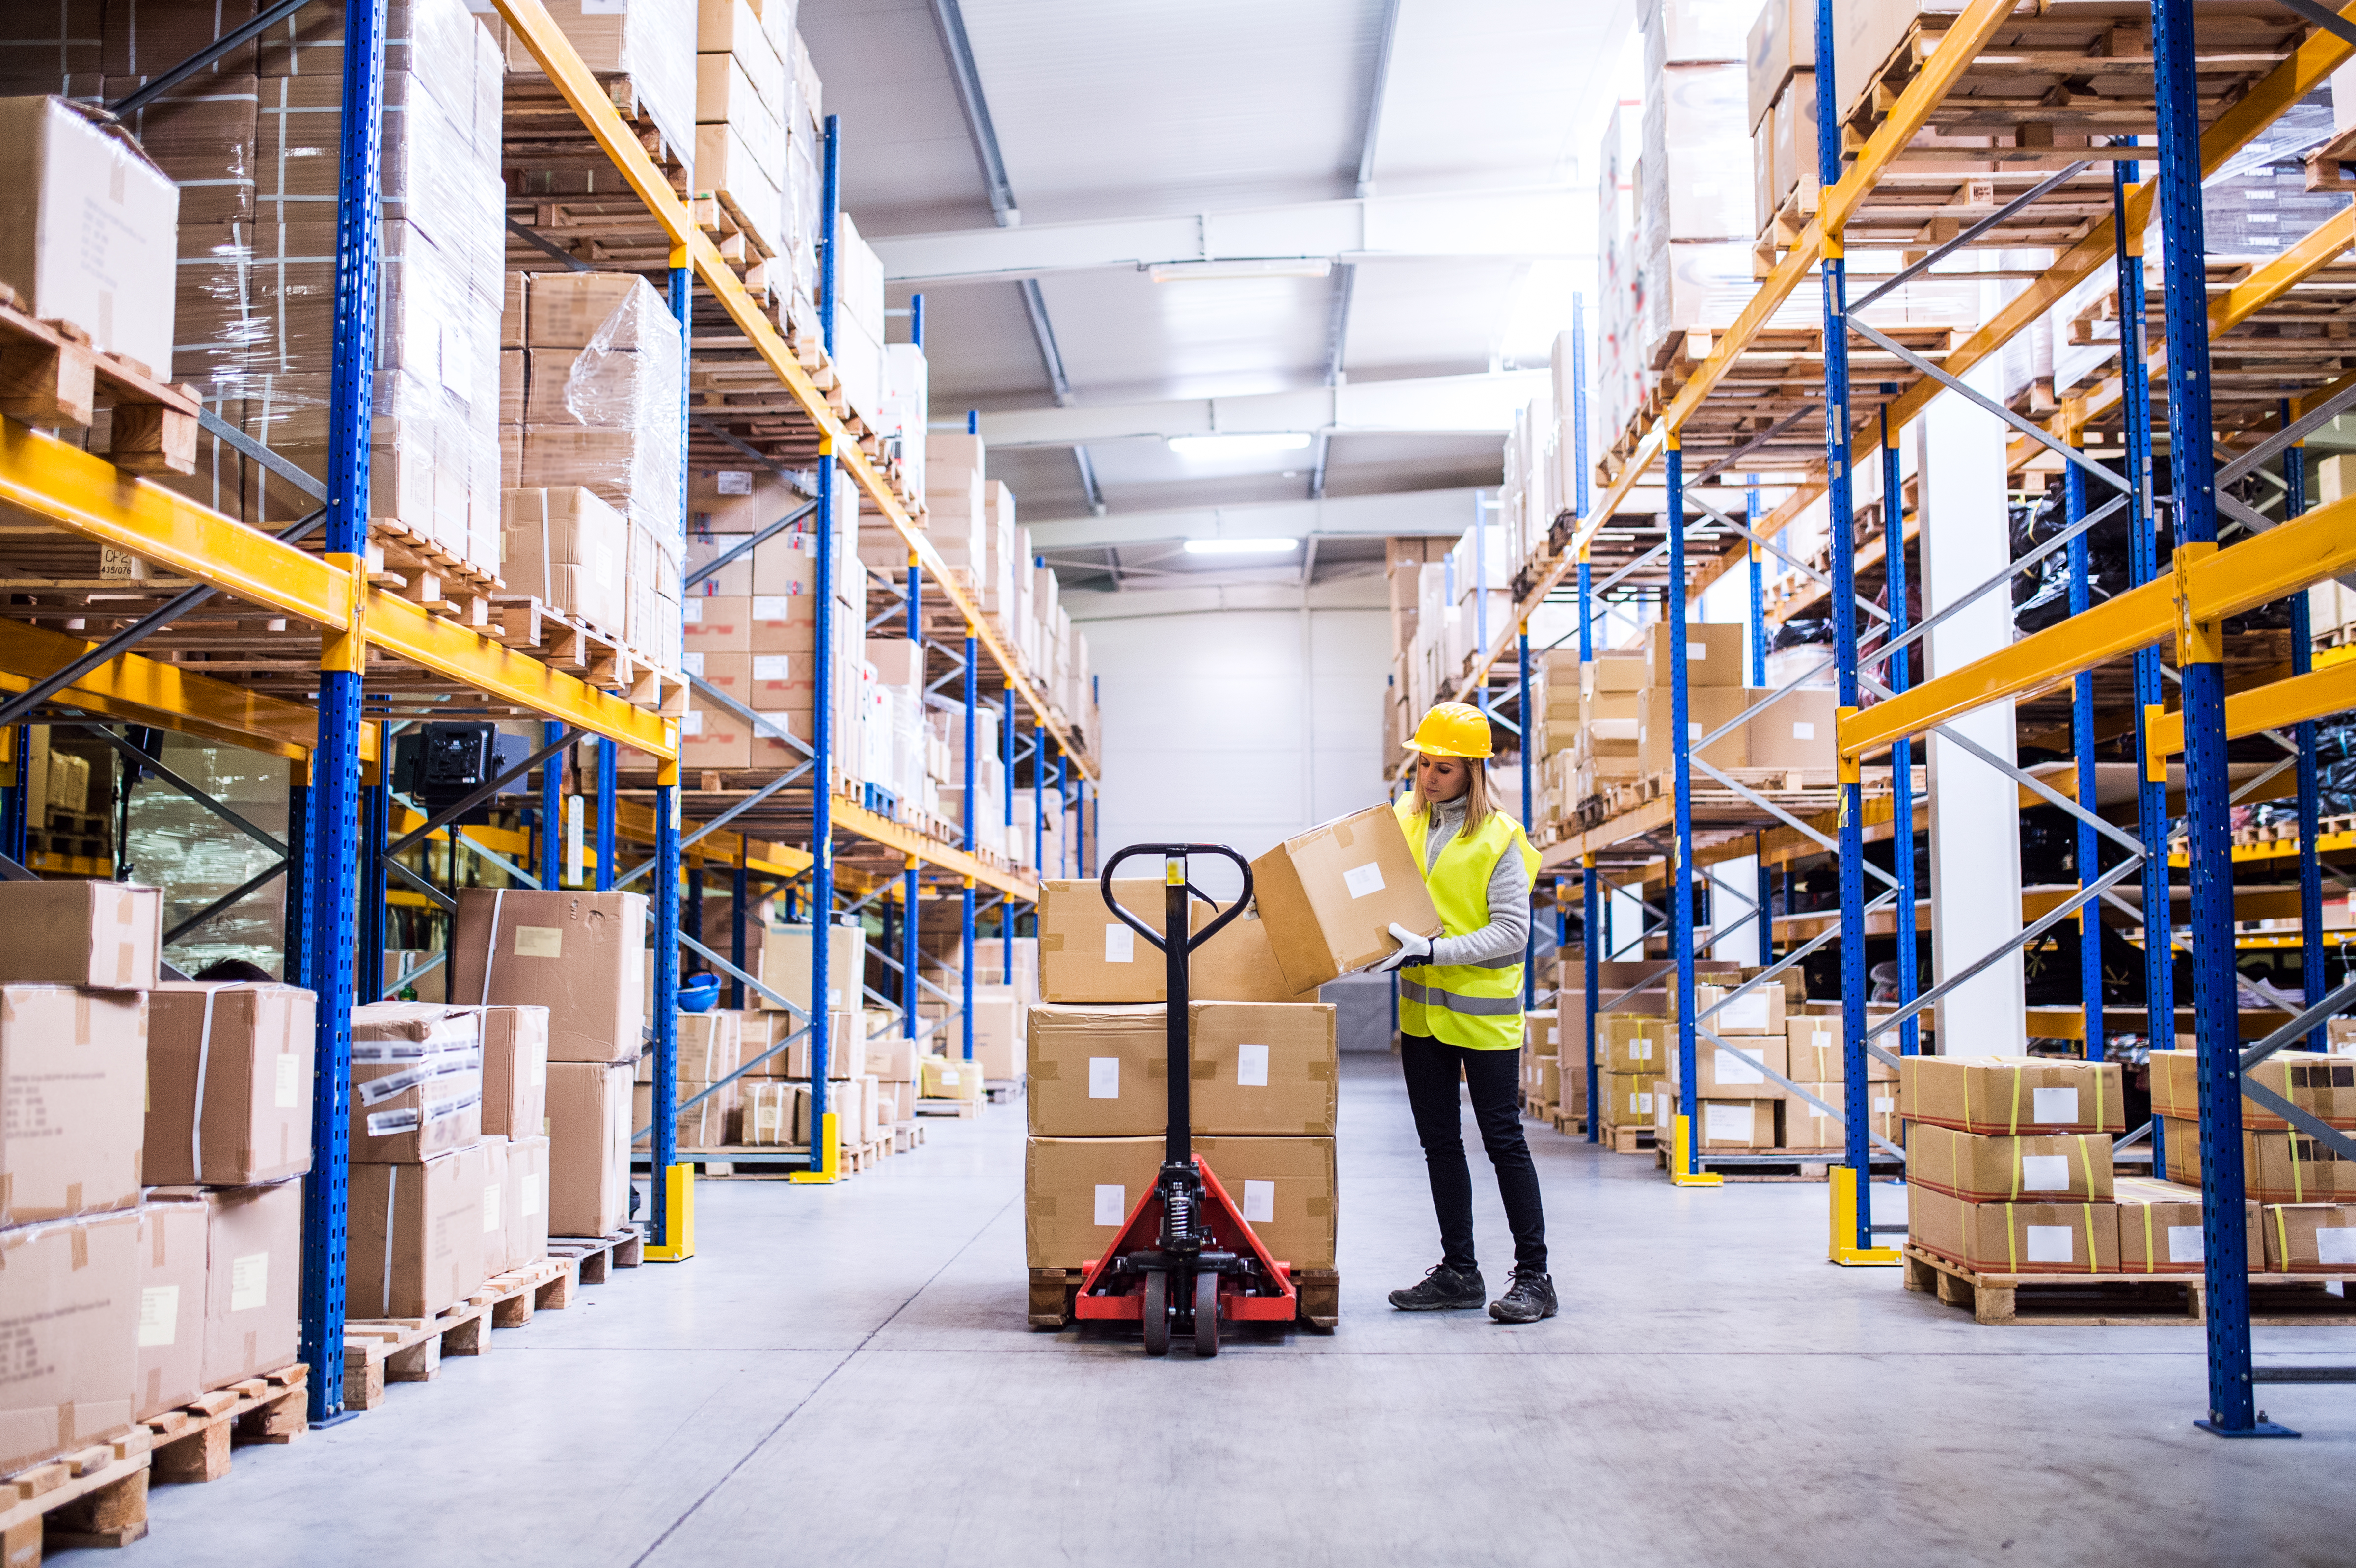 Increasing Demand For Warehouse Workers